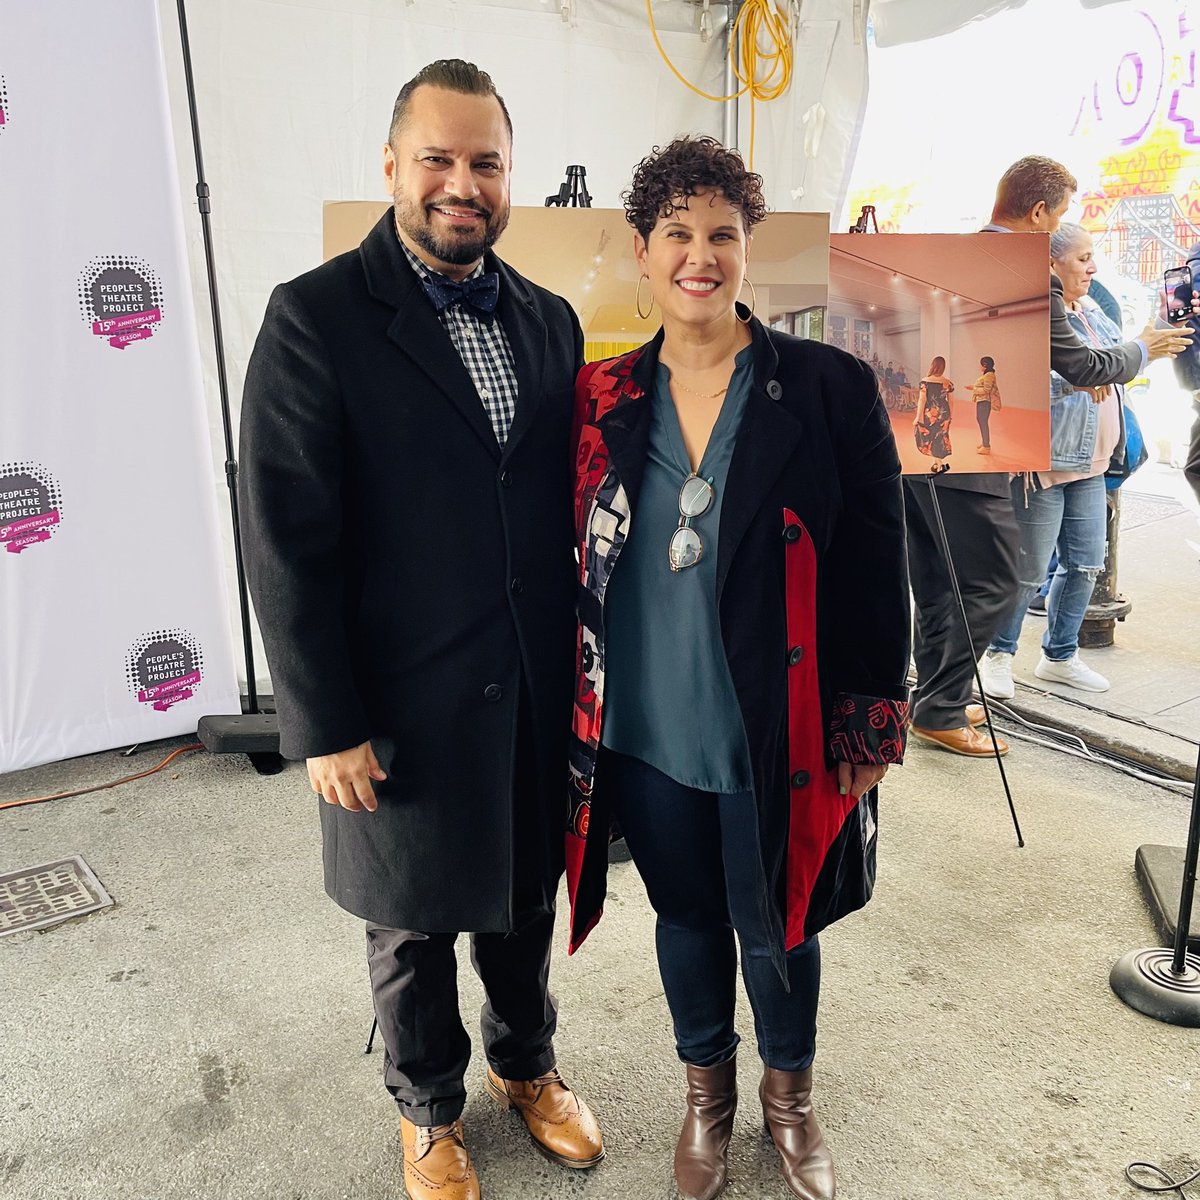 The arts and culture have the power to build bridges and uplift communities. Today I was delighted to offer remarks at the ceremonial groundbreaking for the new People’s Theatre Project @TheatreUptown performance space and cultural center in upper Manhattan.